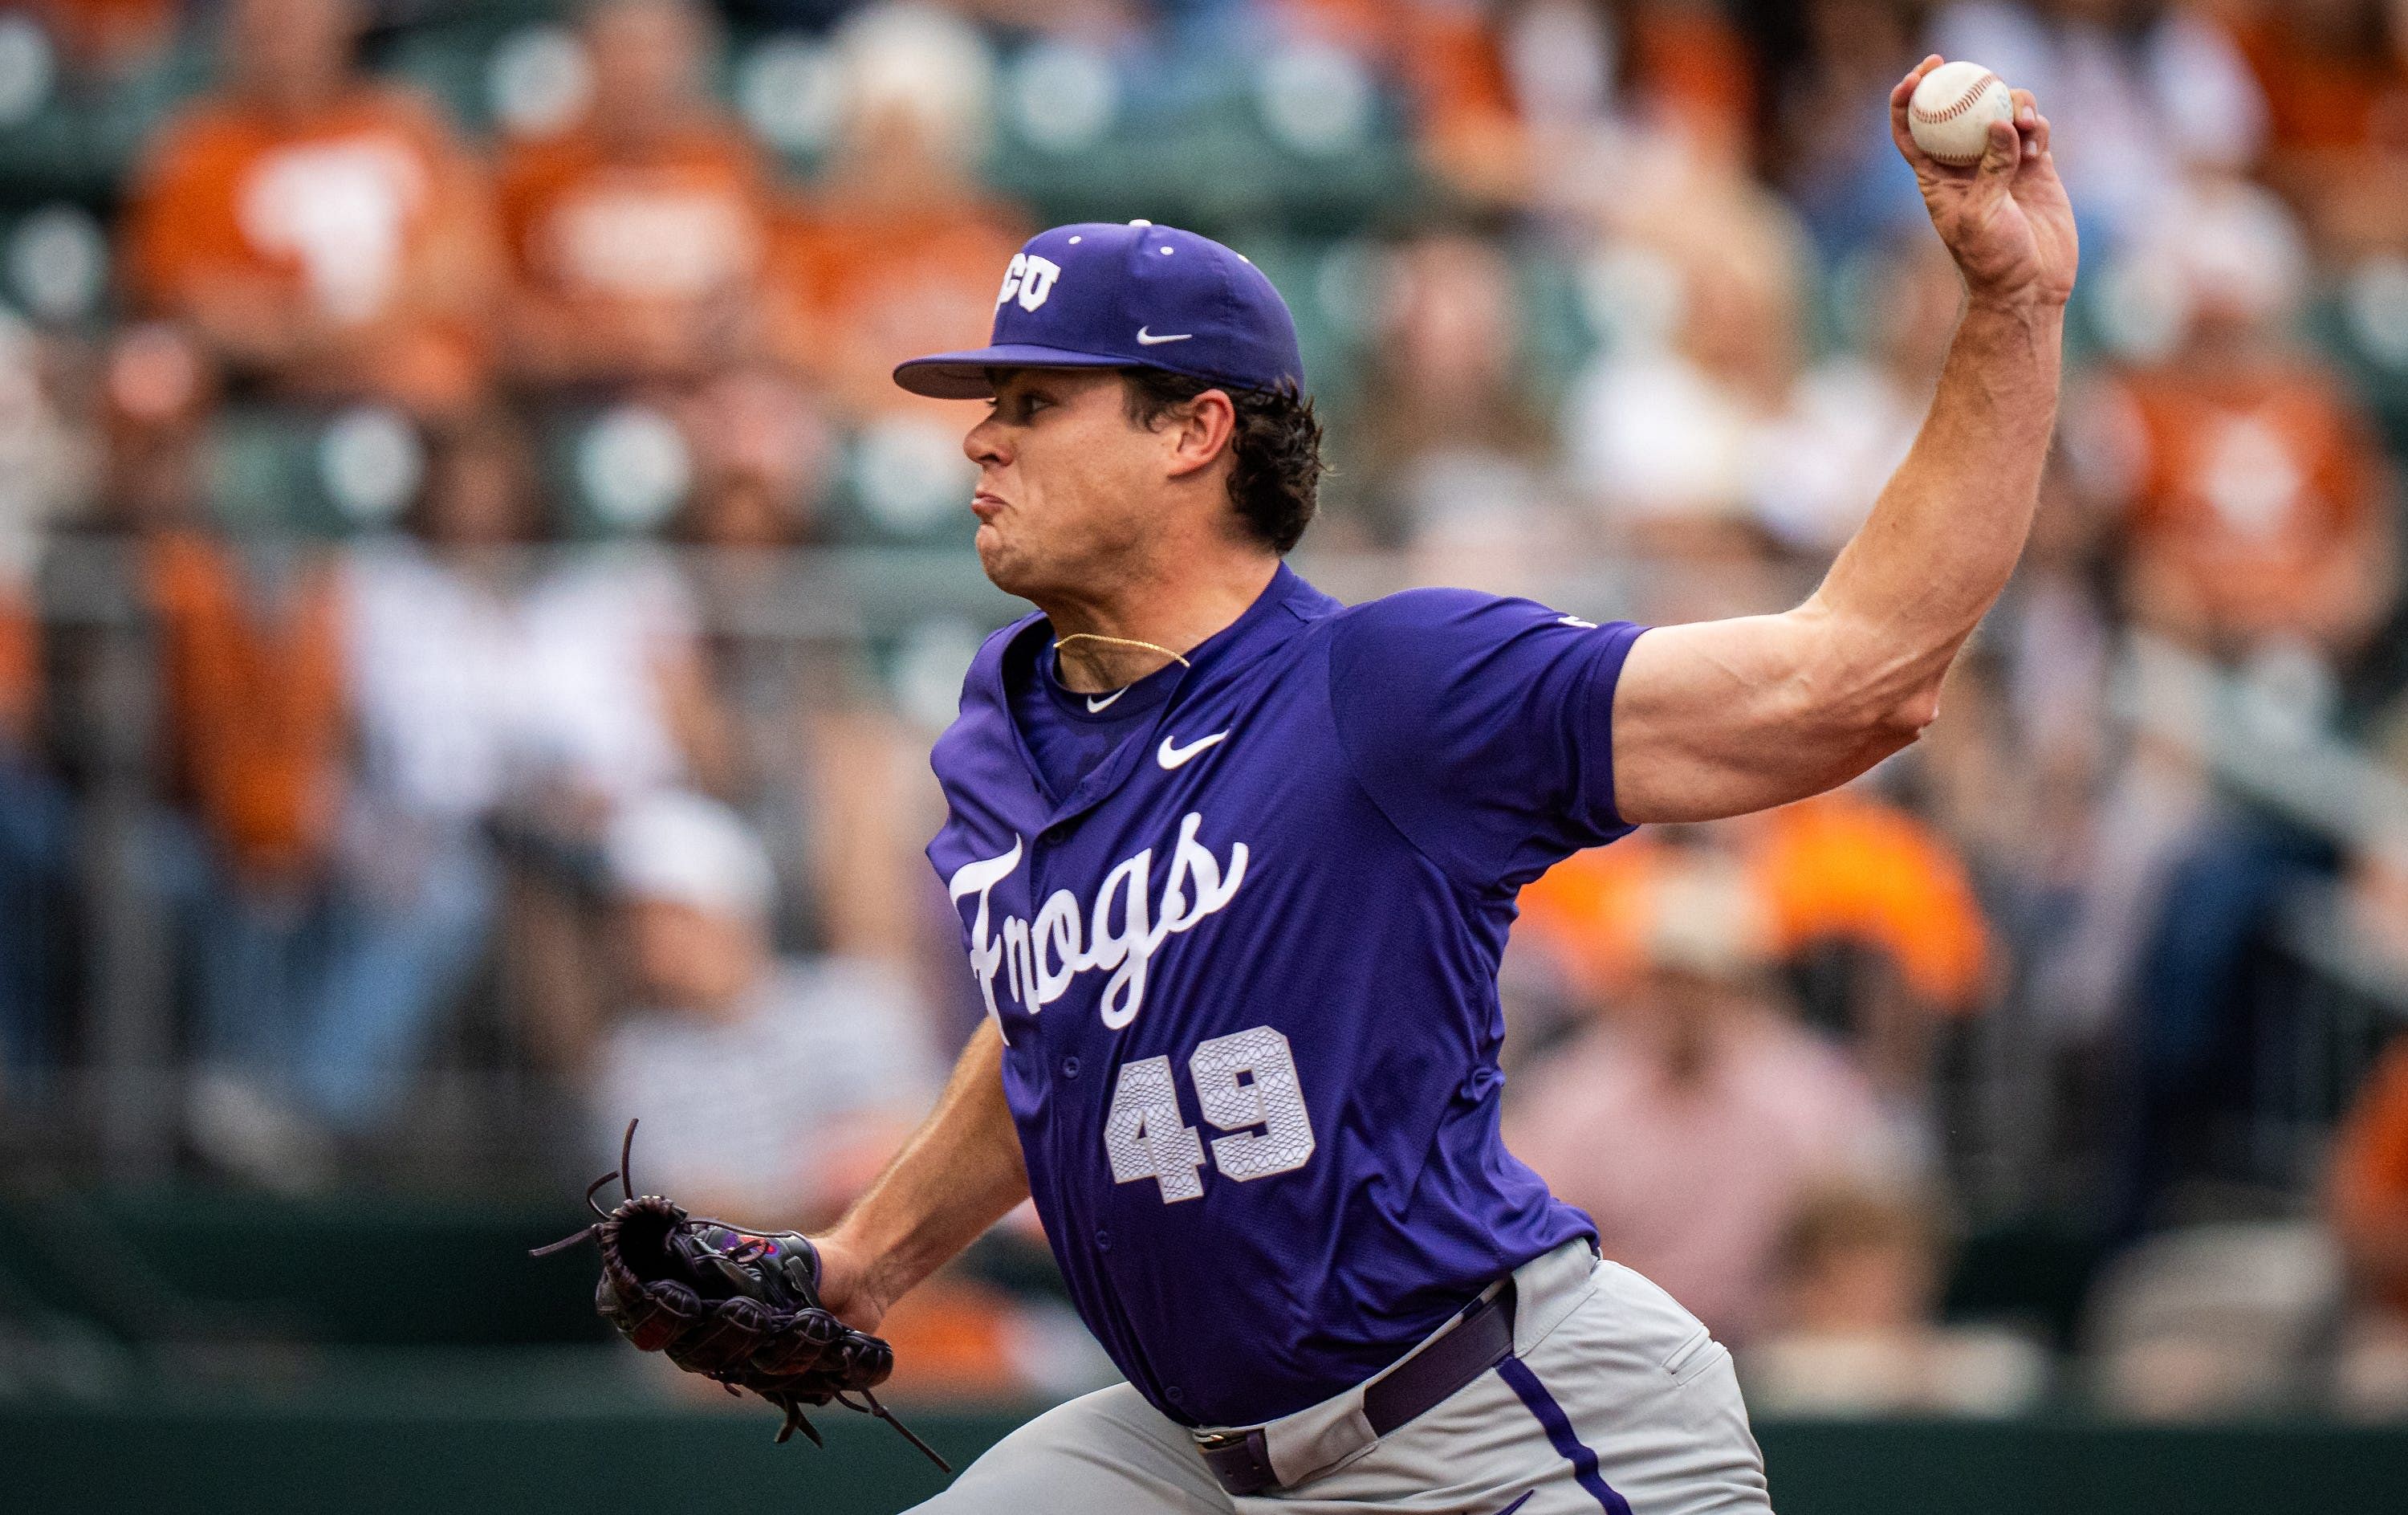 Payton Tolle is 6-3 in 12 starts this season for TCU.